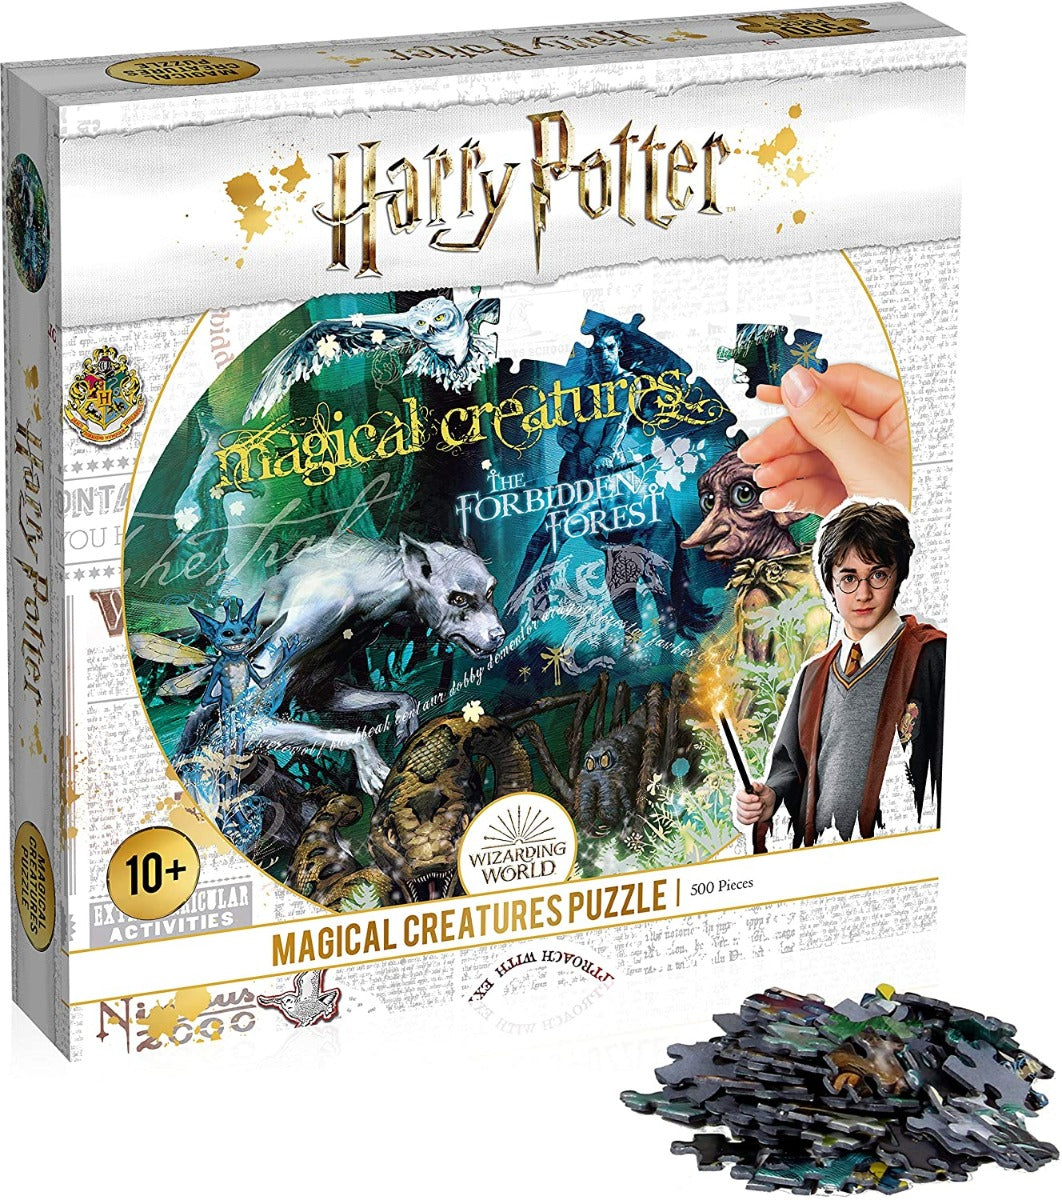 Winning Moves - Harry Potter Magical Creatures - 500 Piece Jigsaw Puzzle